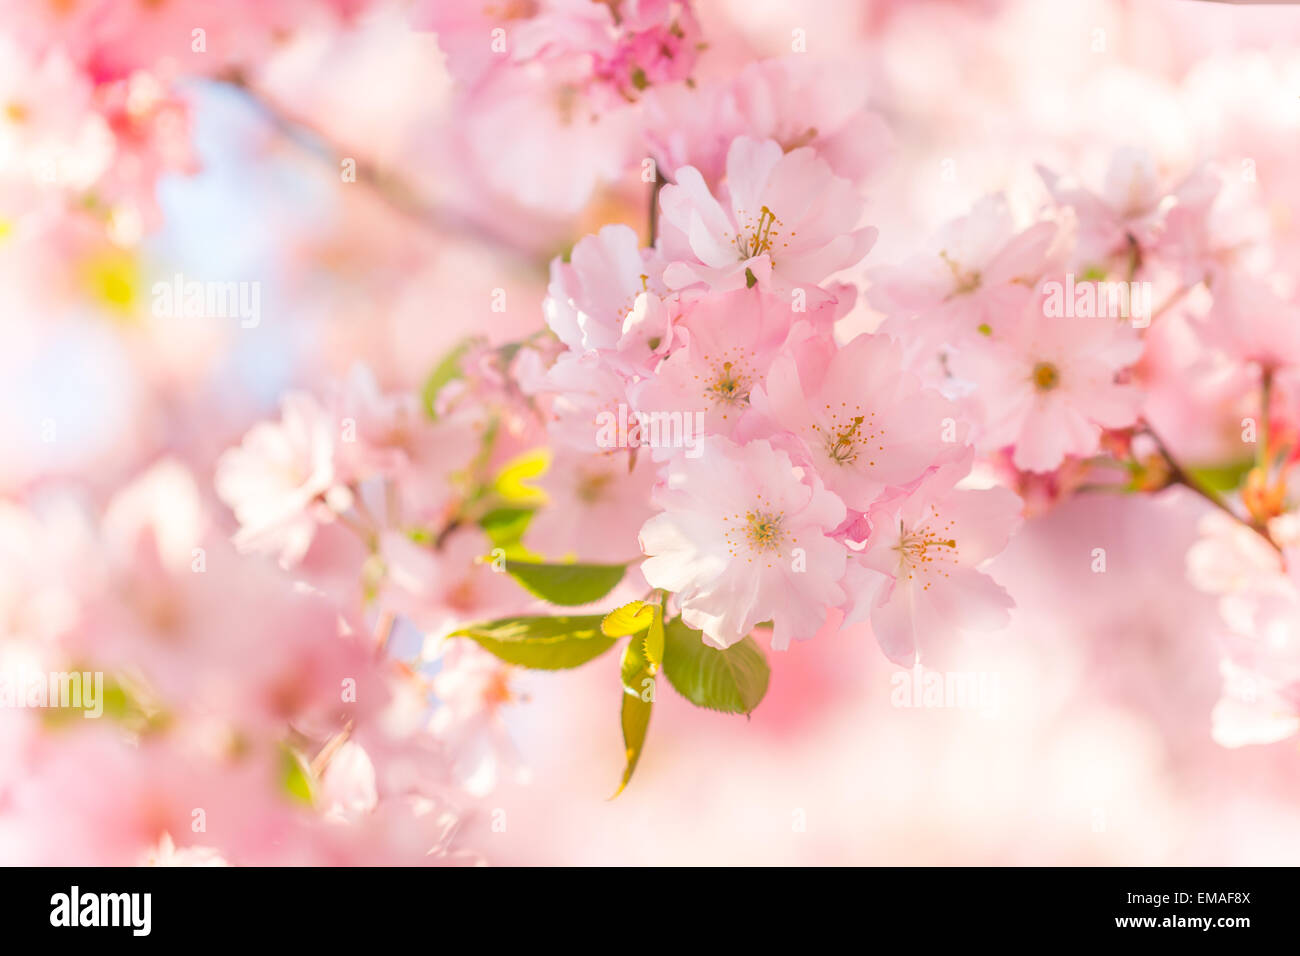 Spring blossoms in macro detail Stock Photo